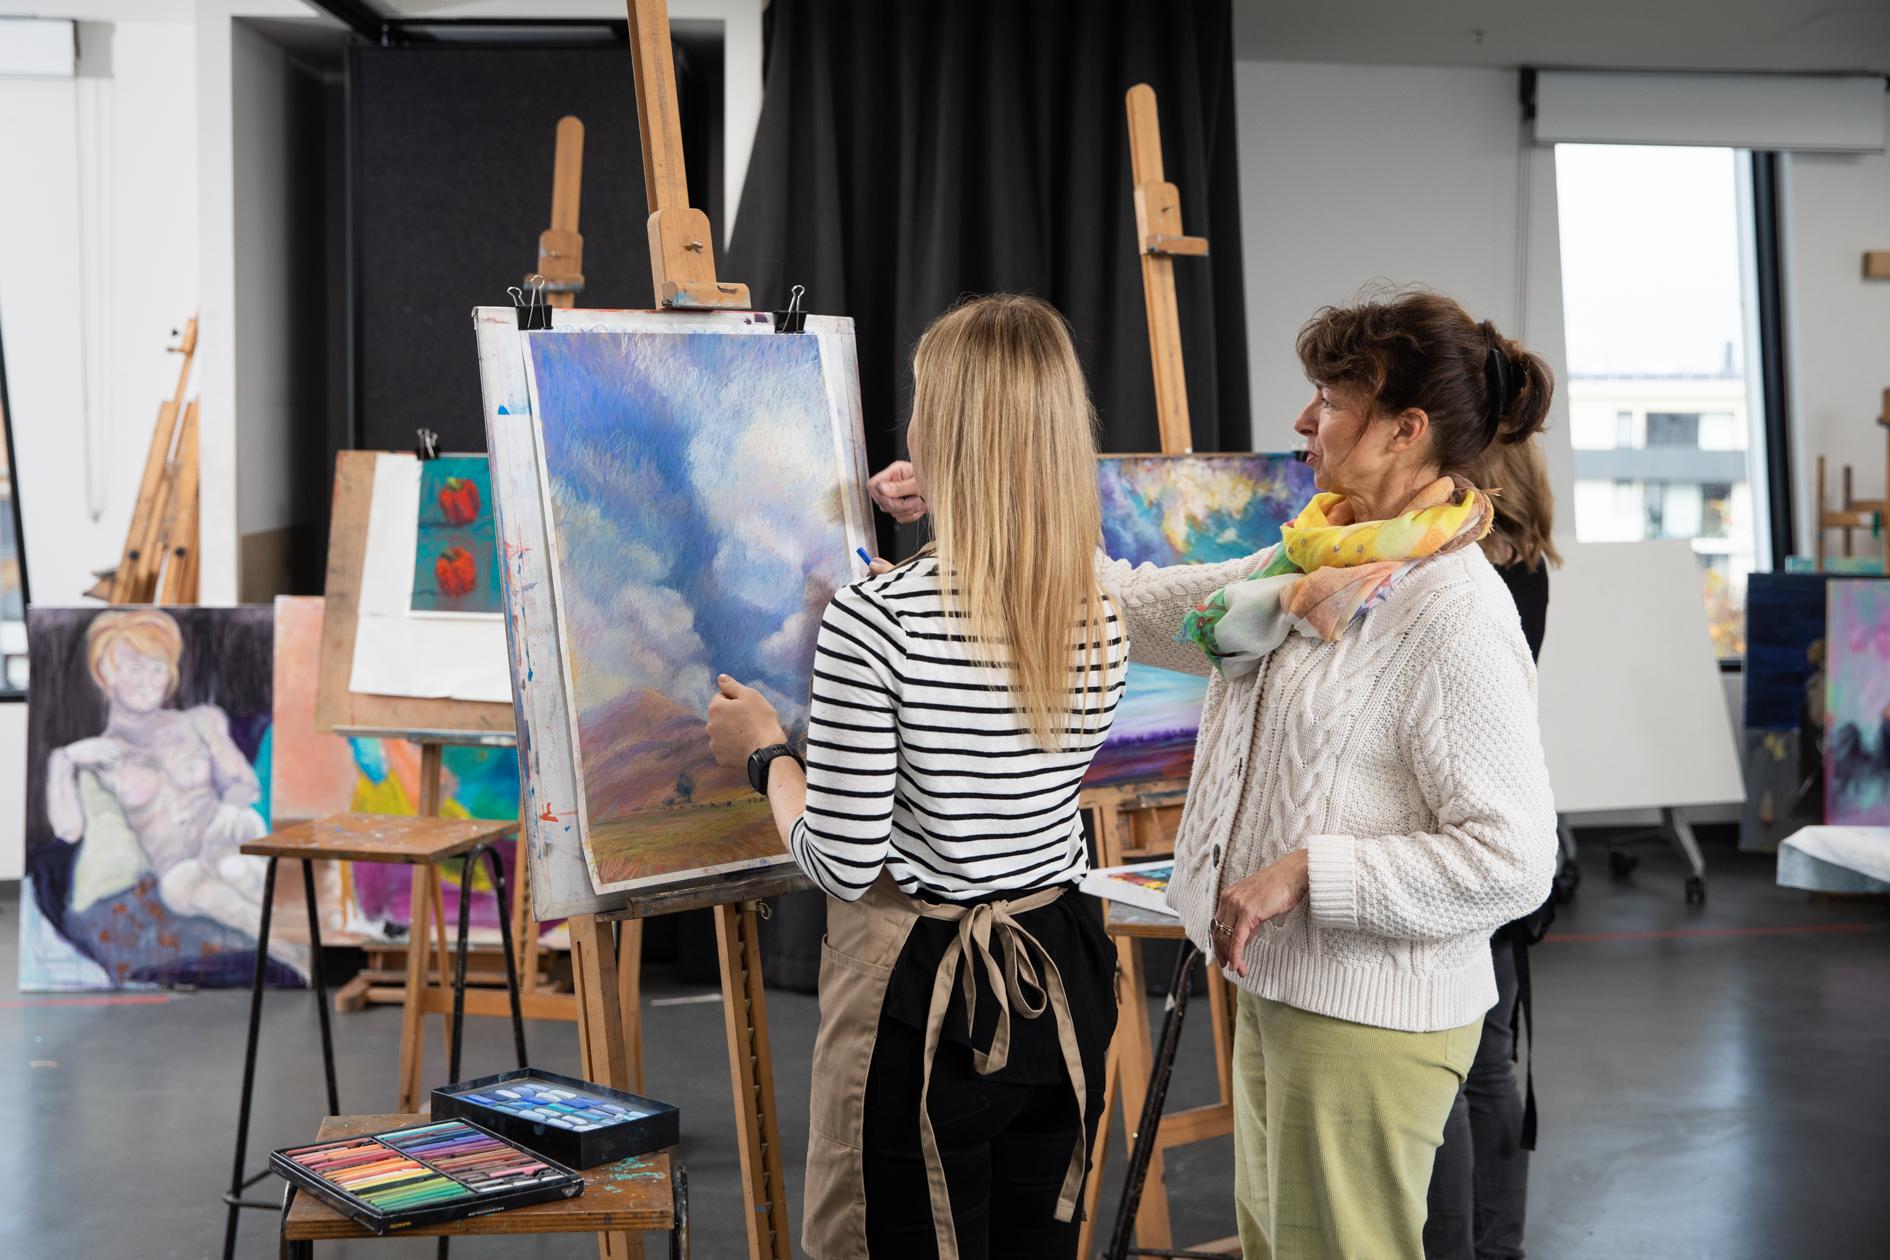 Photo of a student painting a canvas in the centre of frame with a tutor to the right providing instruction.